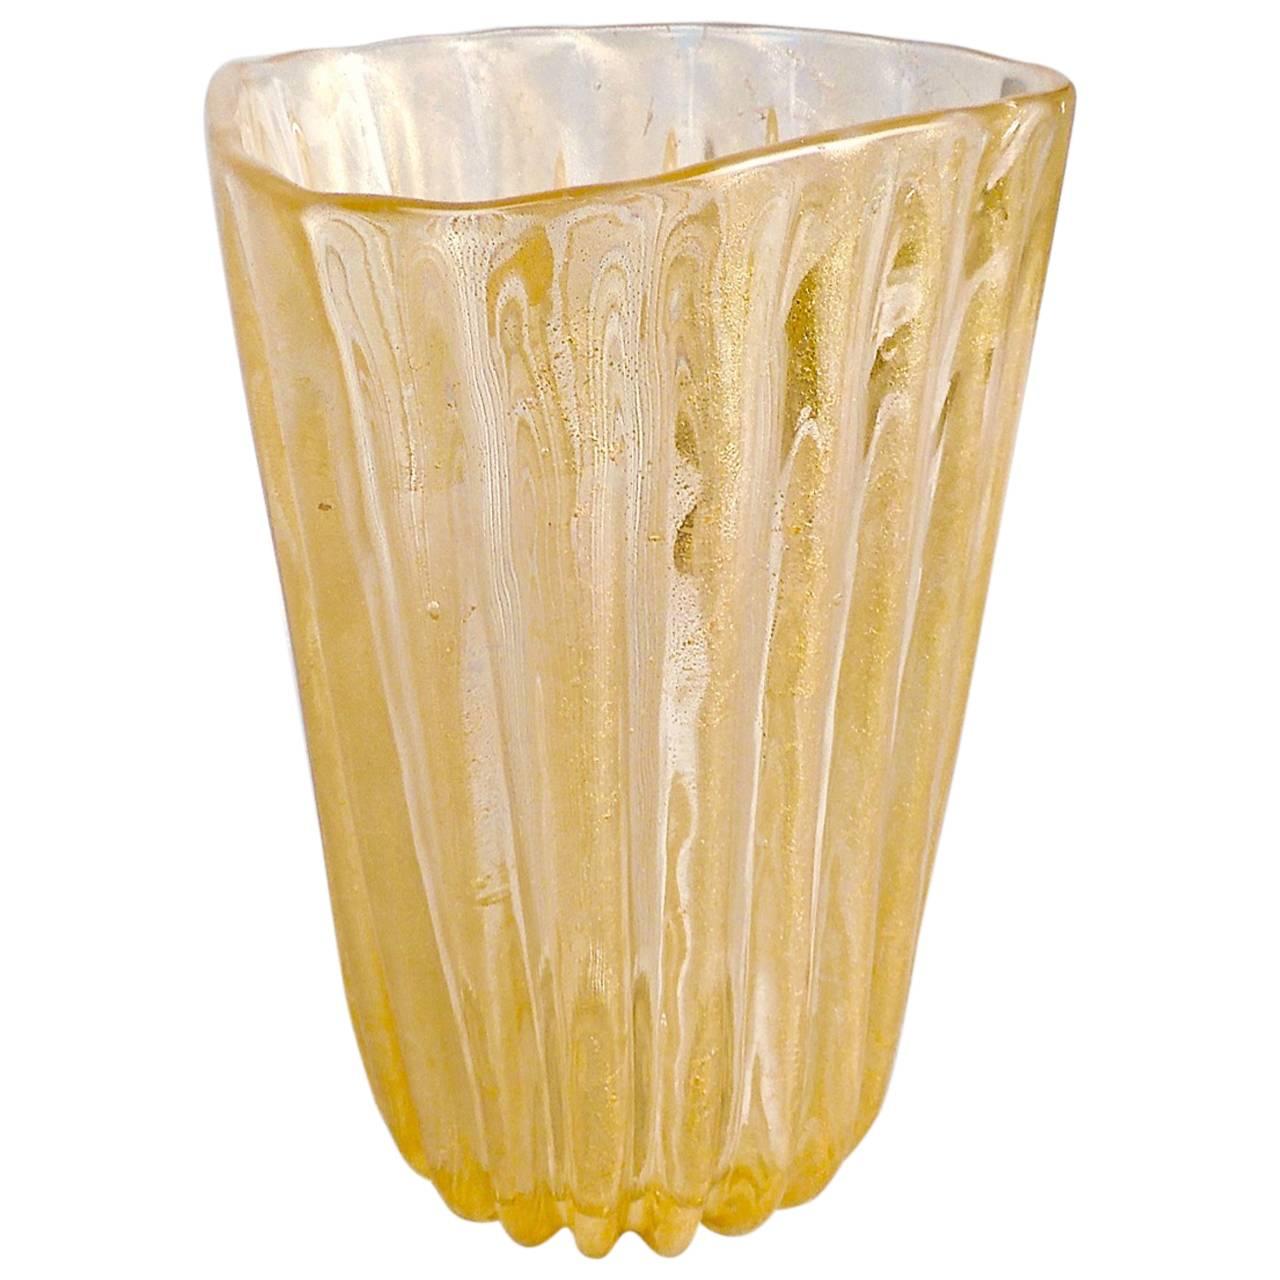 Large Archimede Seguso Ribbed Murano Glass Vase with Gold Foil